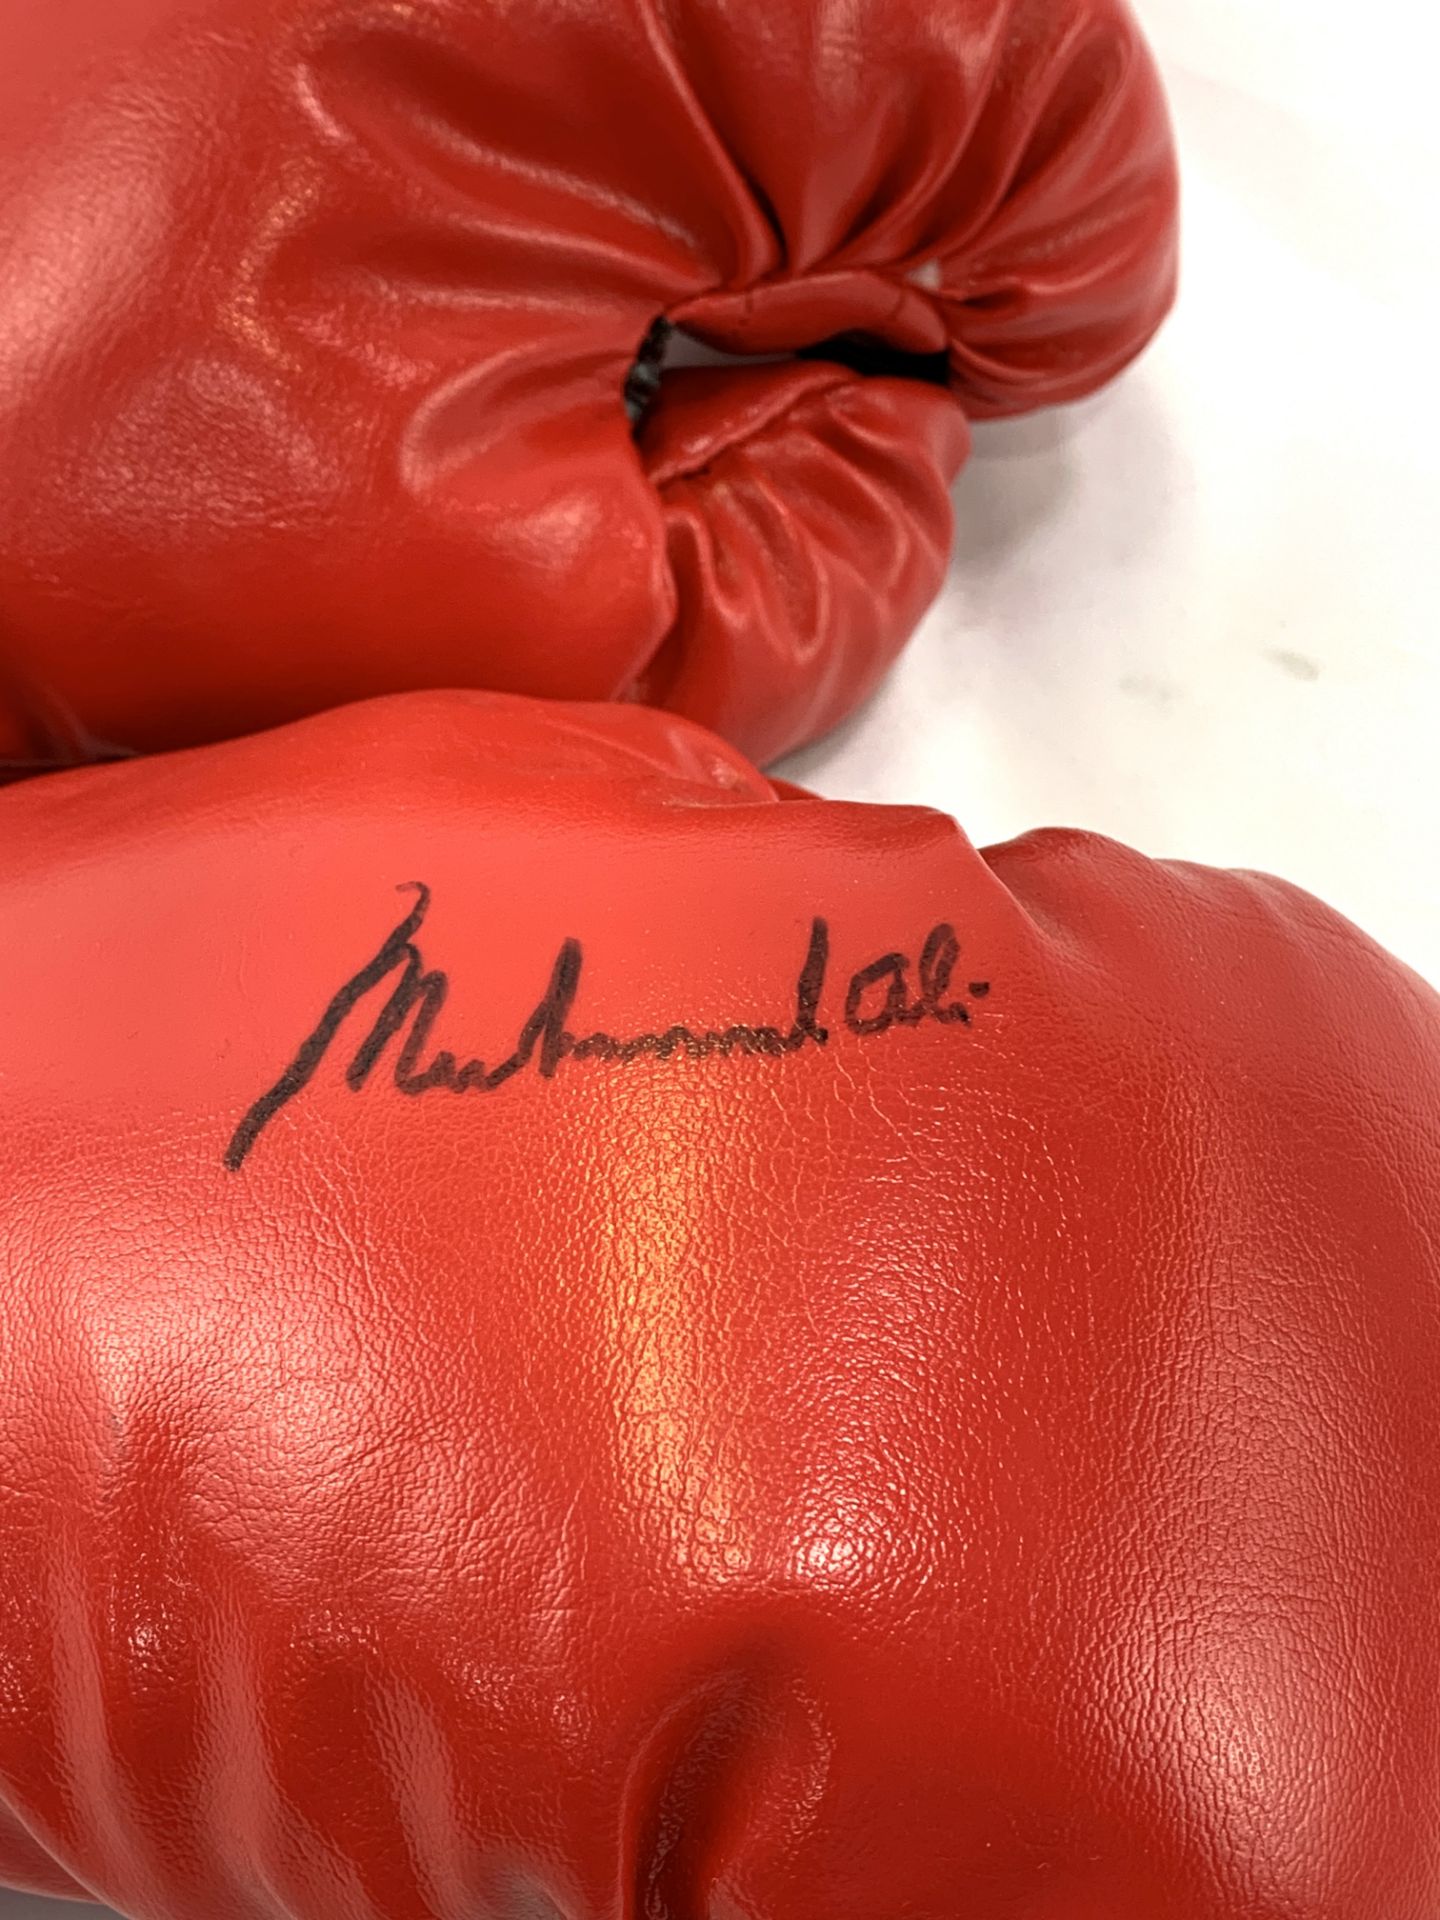 Pair of red Everlast boxing gloves, one signed Muhammad Ali - Image 2 of 2